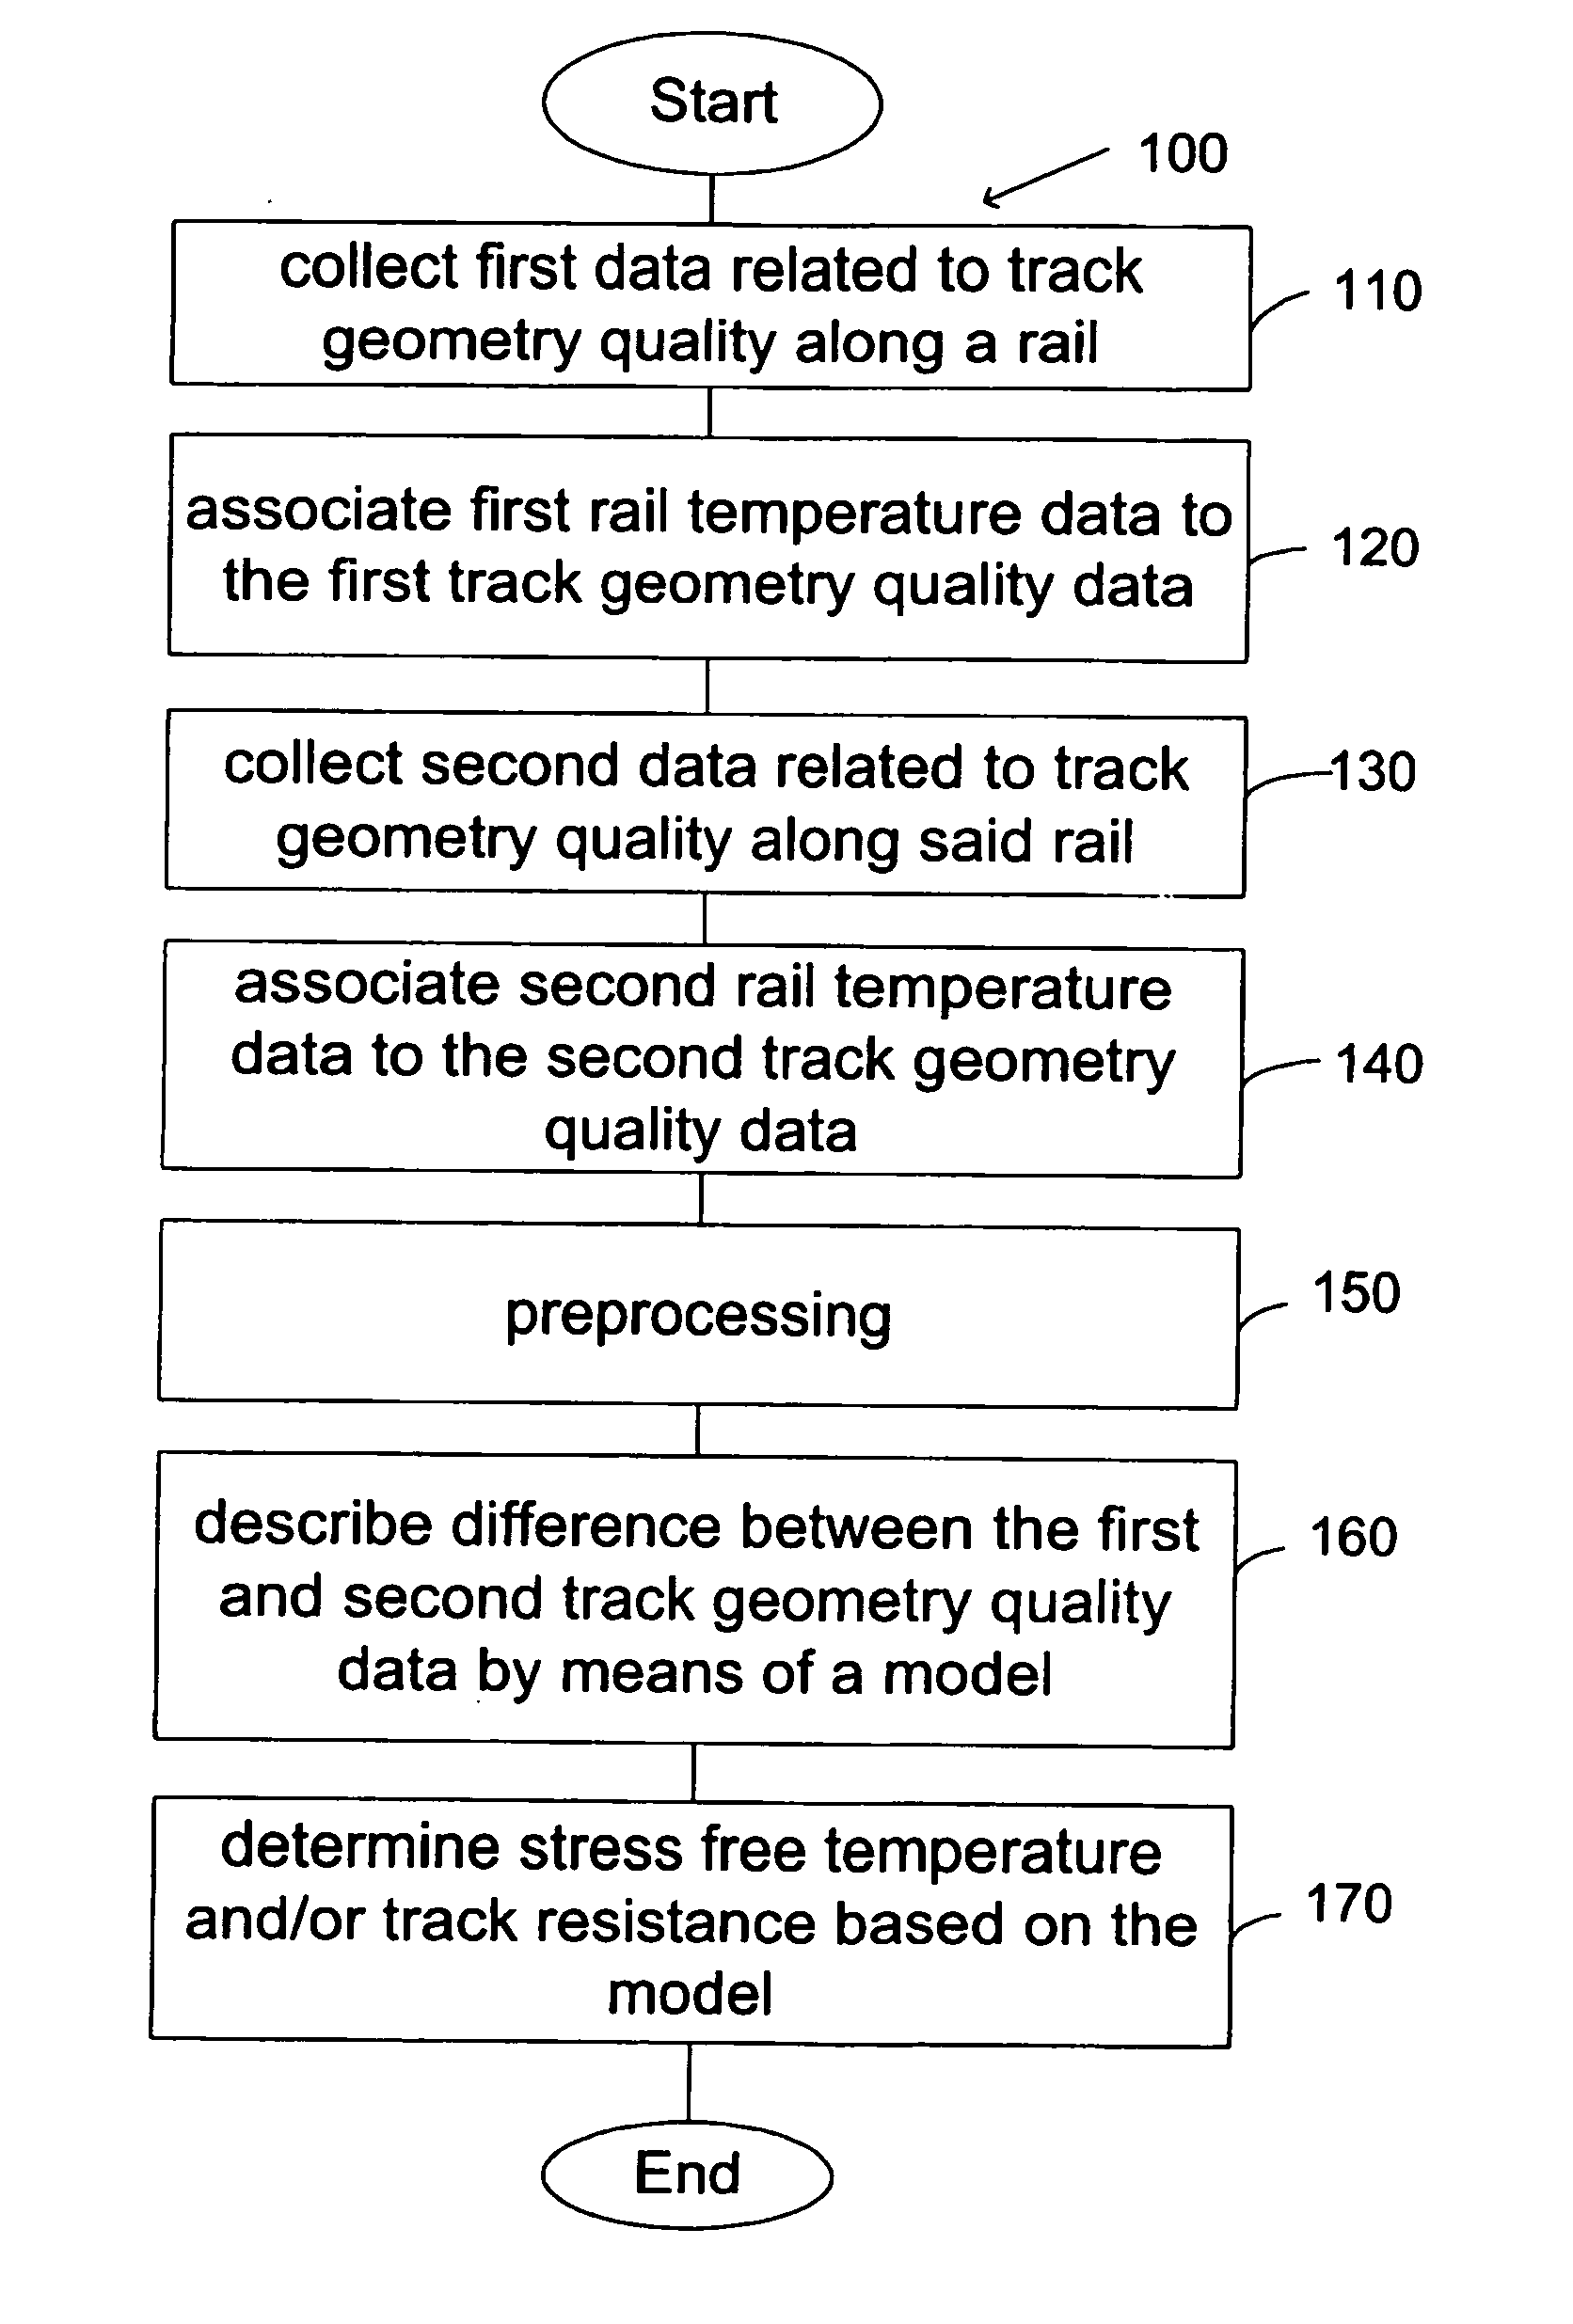 Method for determining the stress free temperature of the rail and/or the track resistance